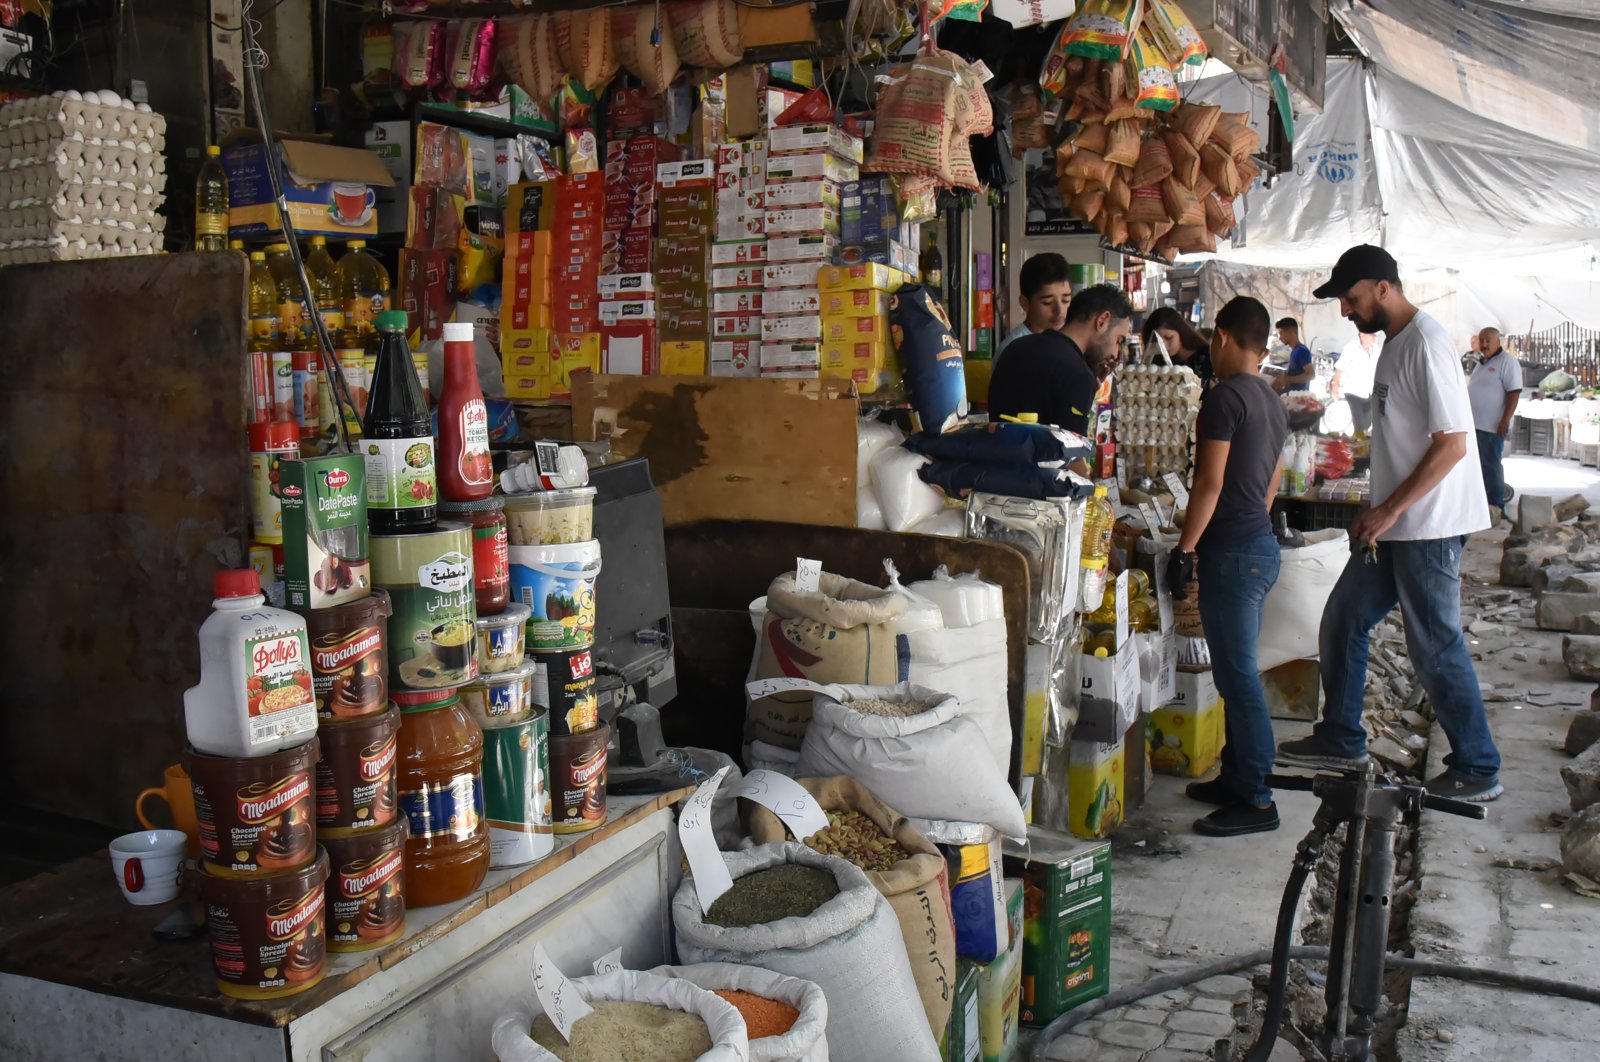 Syrians shop at a market in Damascus hours after Syrian regime leader Bashar Assad issued a legislative decree granting civil servants and military members a 50% salary increase, Damascus, Syria, July 11, 2021. (EPA Photo)